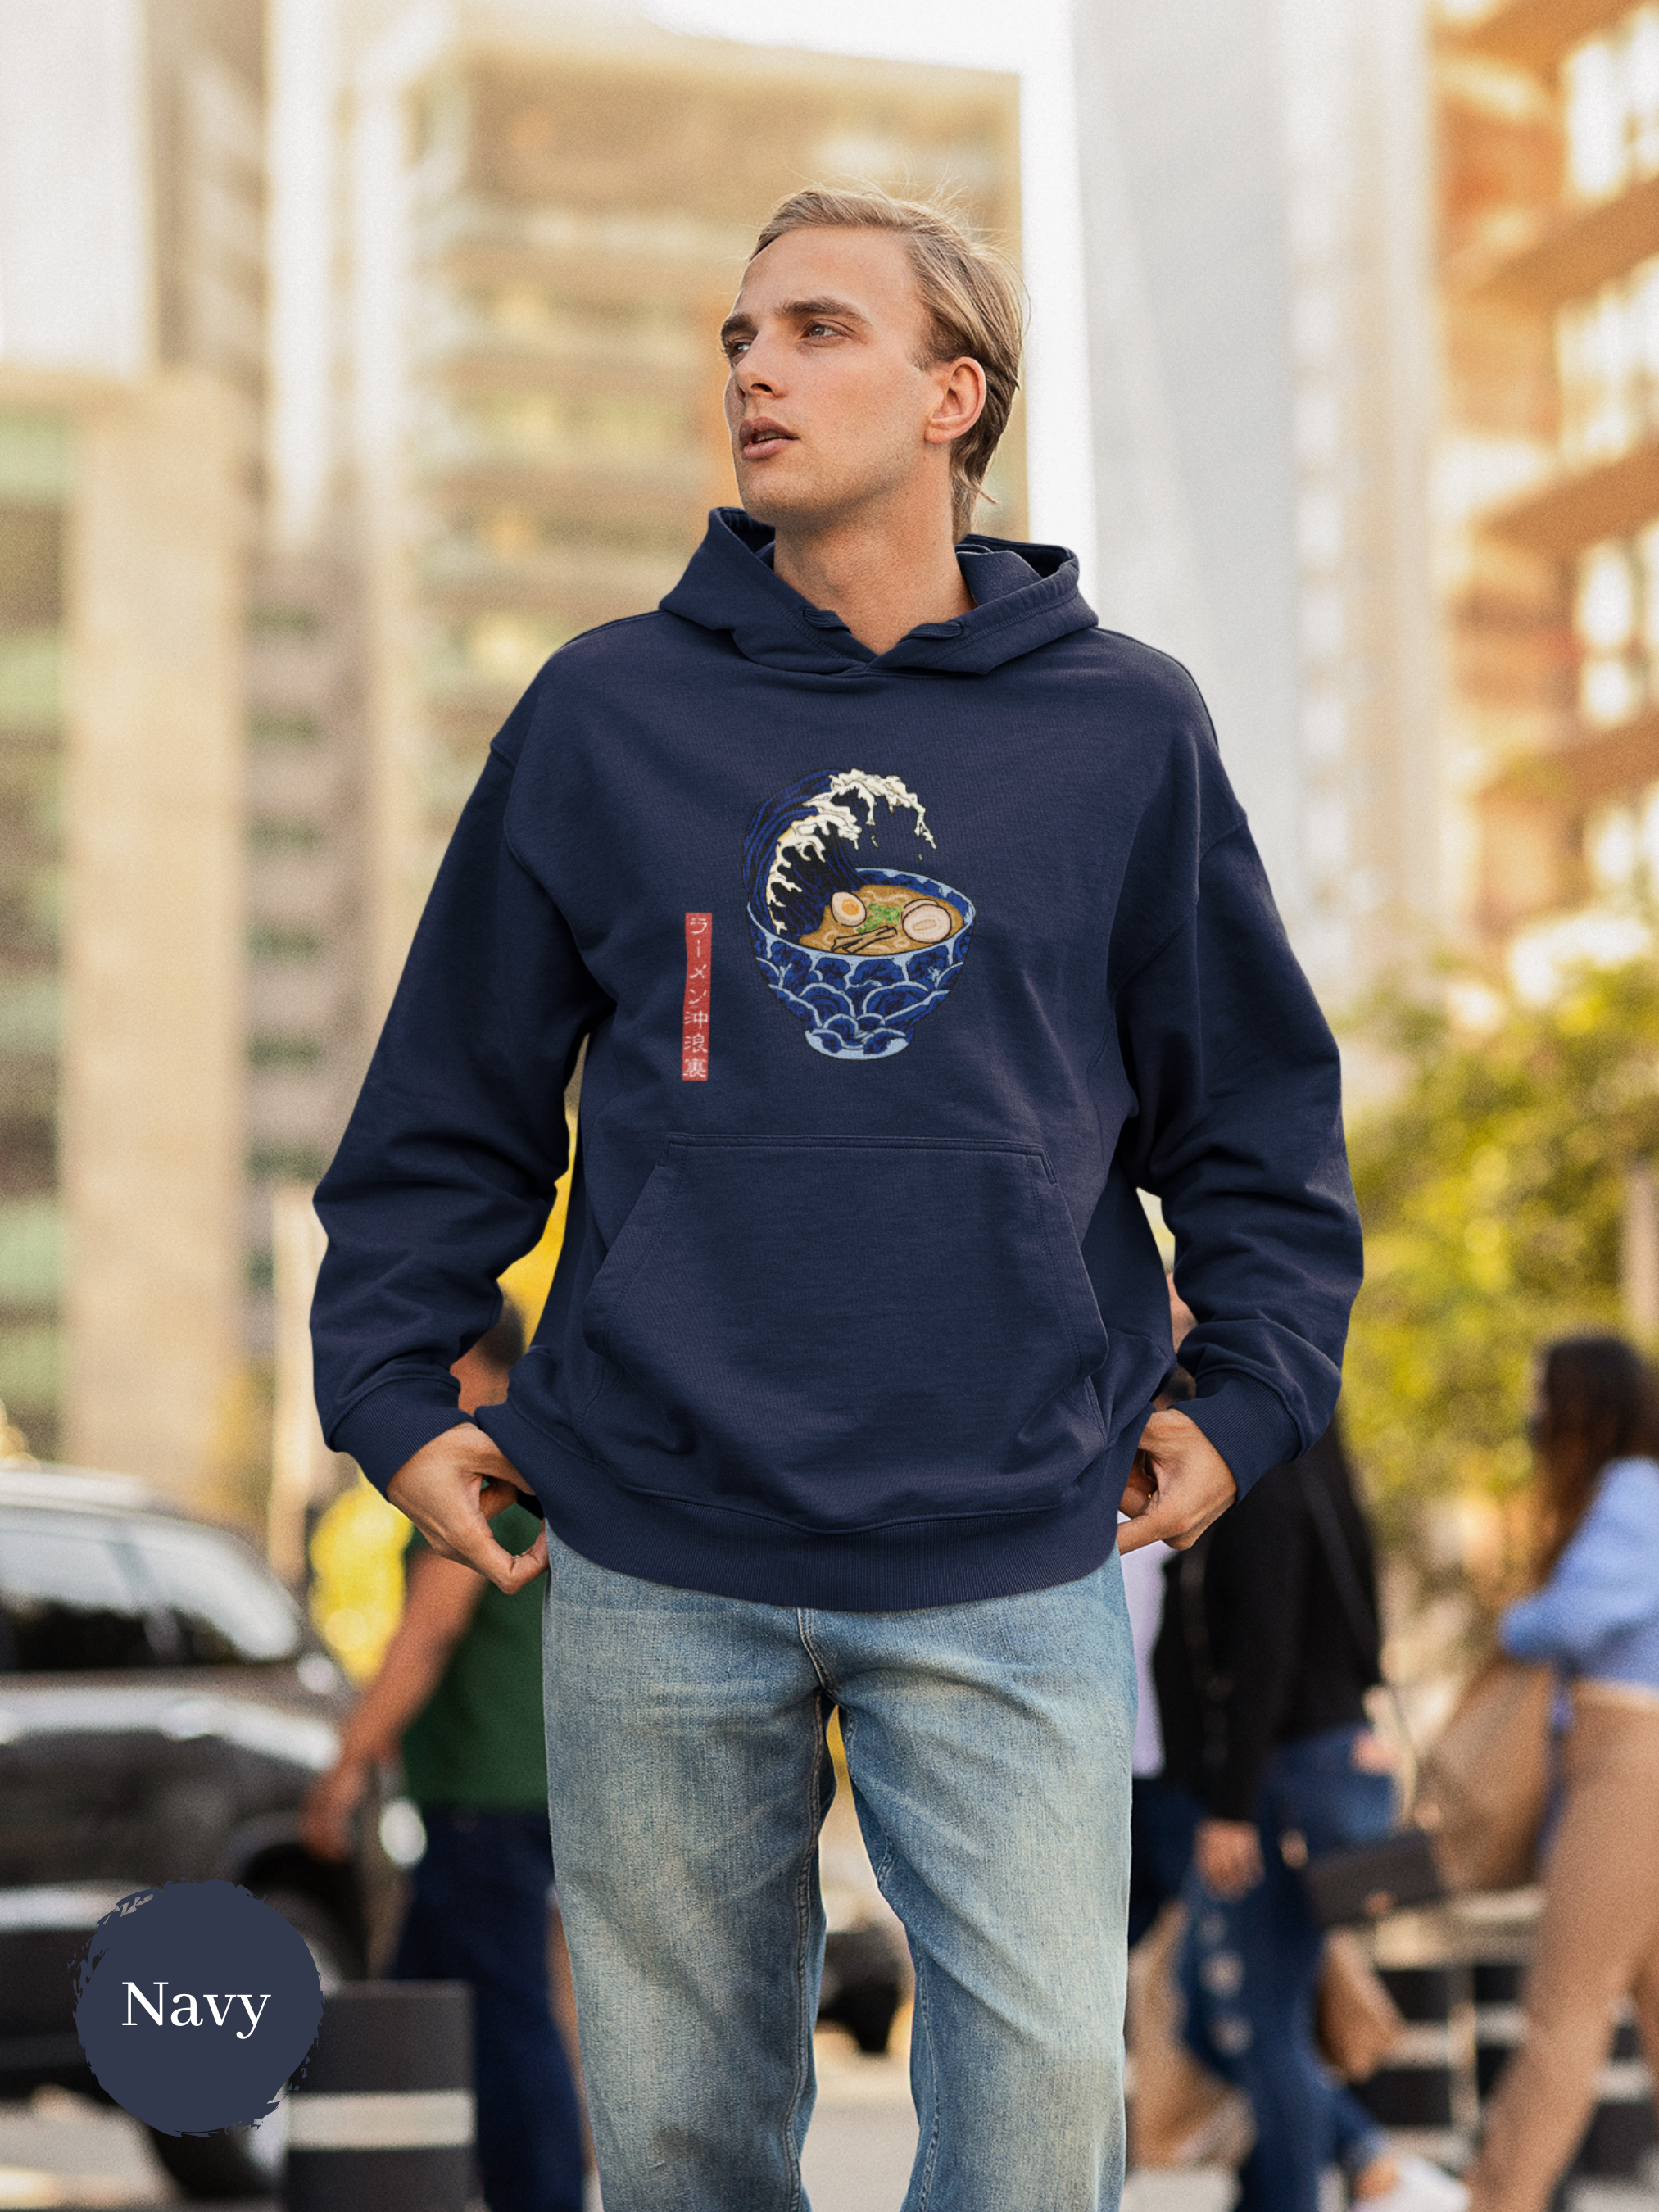 Ramen Hoodie: Hokusai Wave Edition - Foodie and Asian Food Hoodie with Stunning Ramen Art and Japanese-Inspired Design